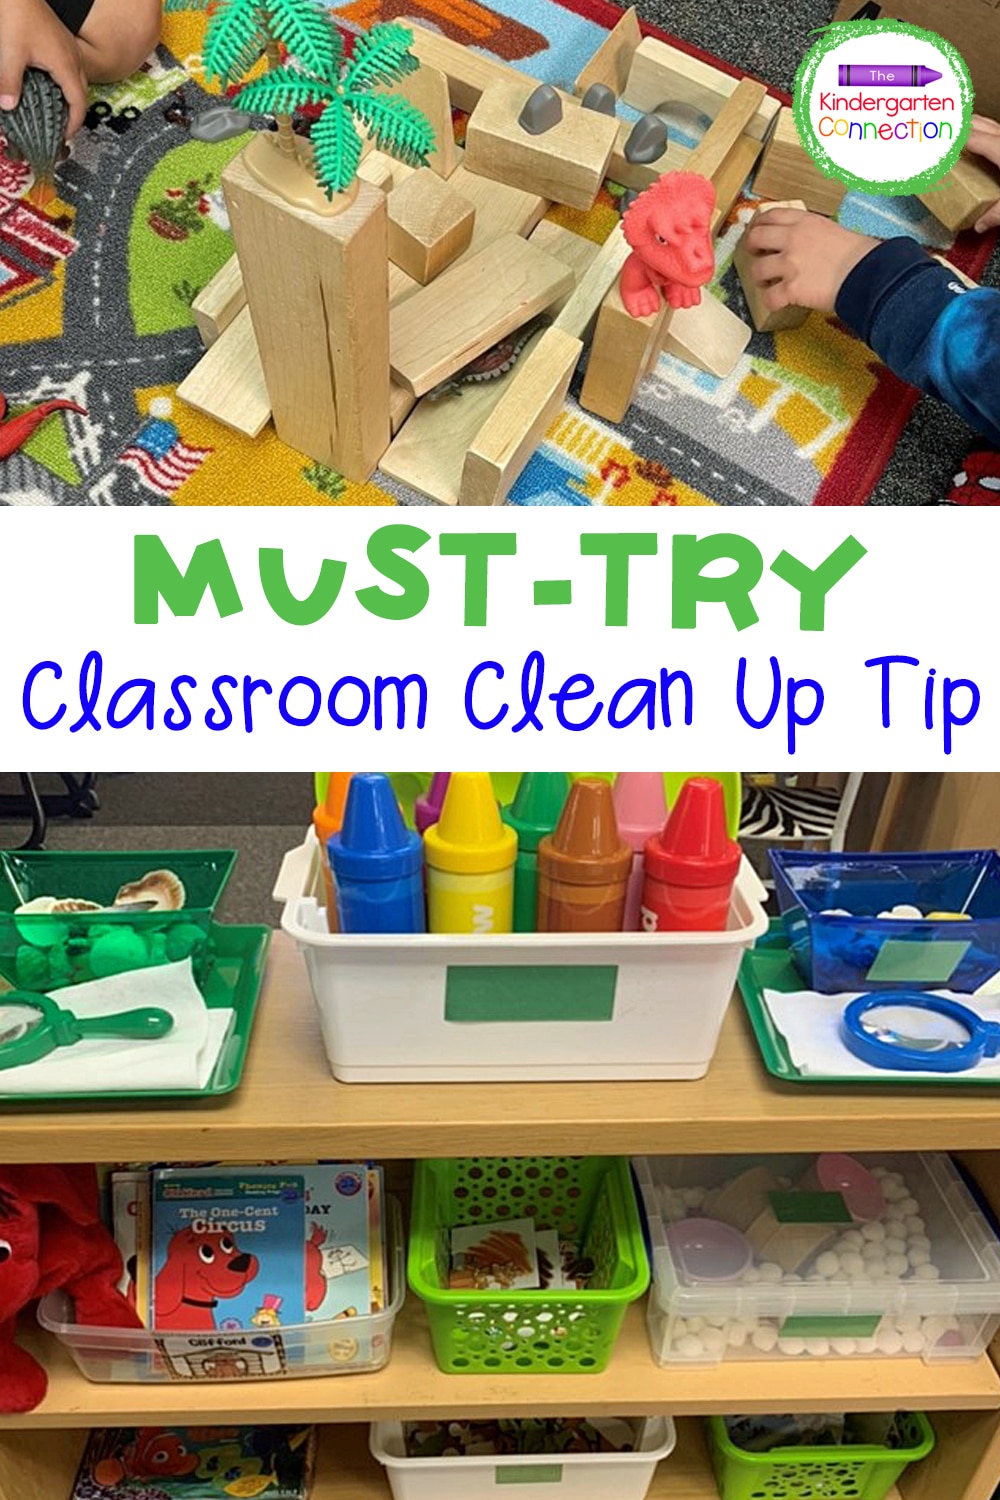 This Must-Try Classroom Clean Up Tip is sure to have you stressing less about the mess while still encouraging tons of learning fun!